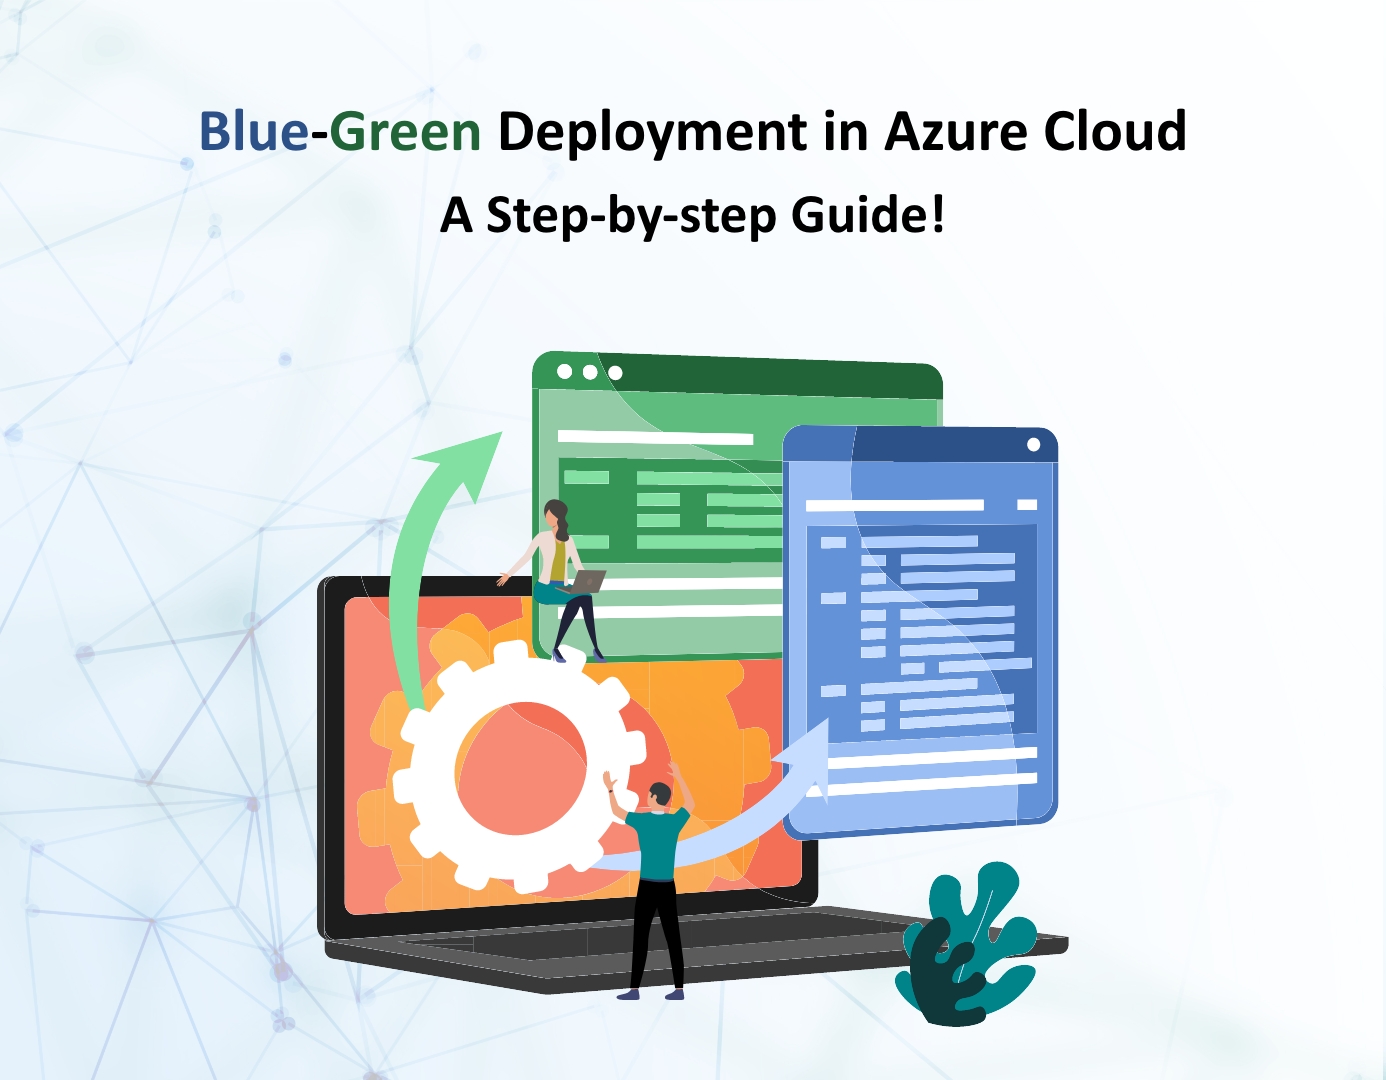 Blue-Green Deployment in Azure Cloud. A Step-by-step Guide